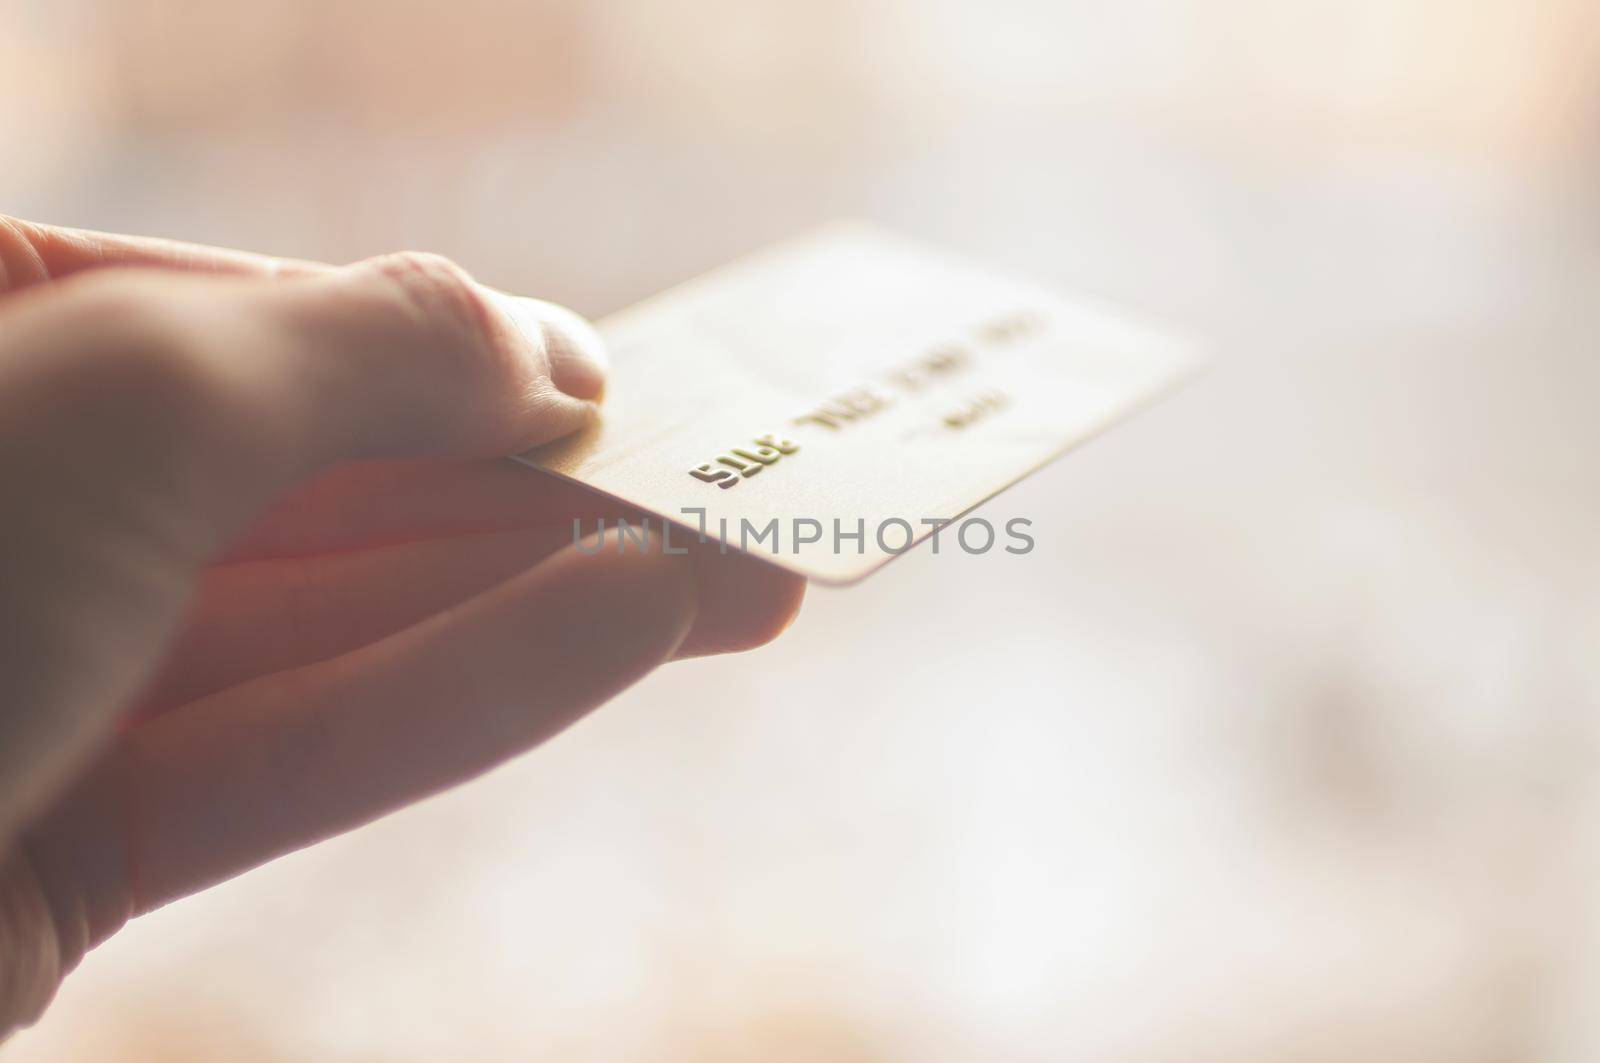 bank card of gold color in hands on a background by ozornina